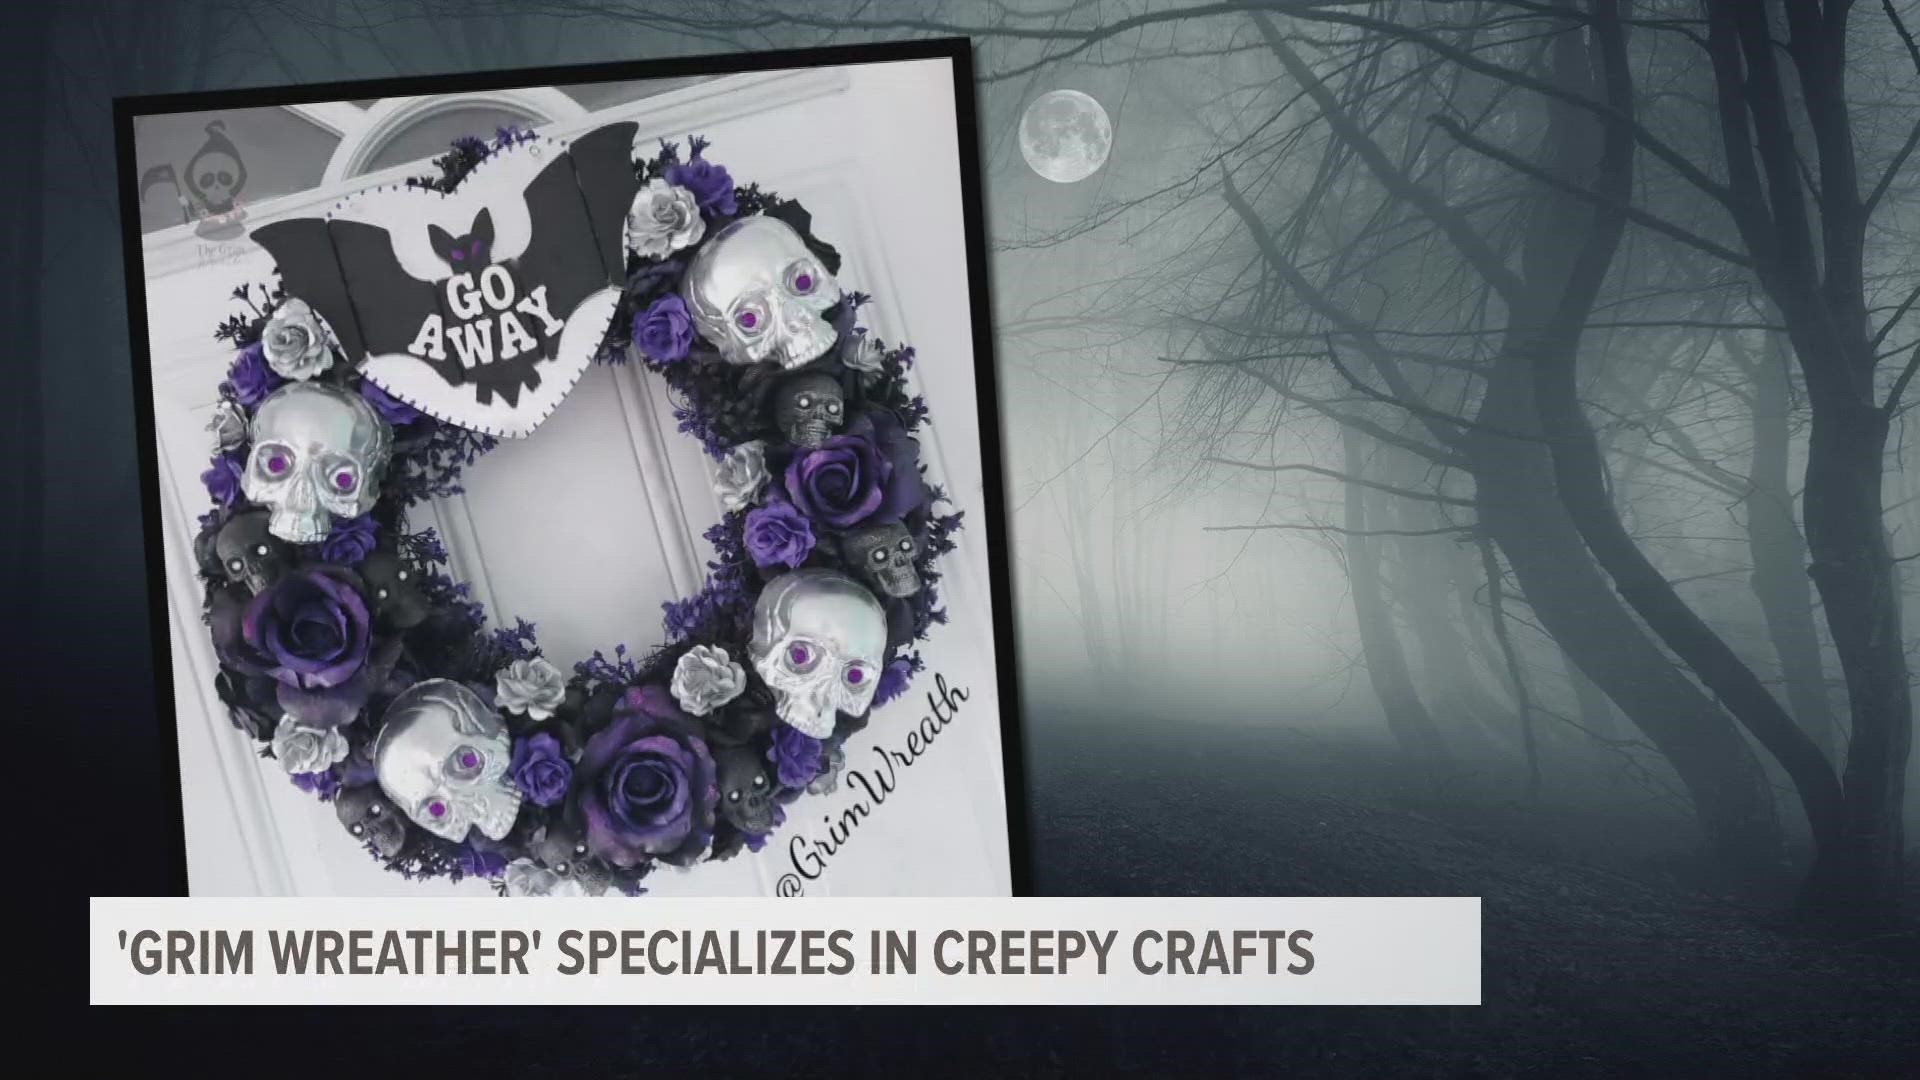 Sarah Claxton is better known as the Grim Wreather. She uses her creativity to craft spooky door decoration for her business, the Grim Wreath.